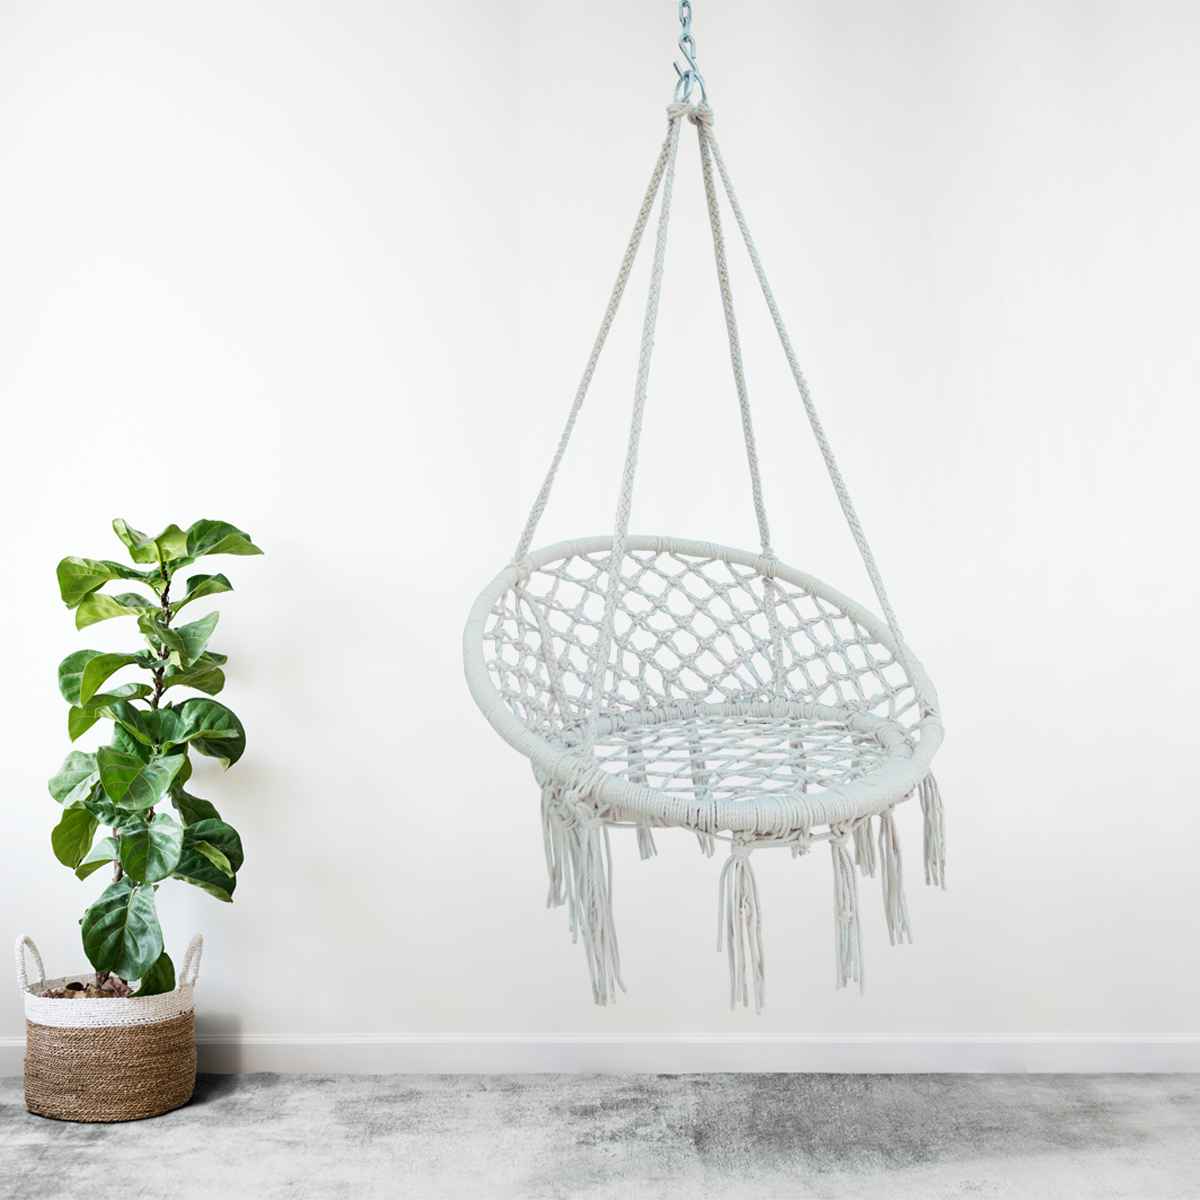 Hangit Durable Thick Canvas Swing with Decorative Crochet